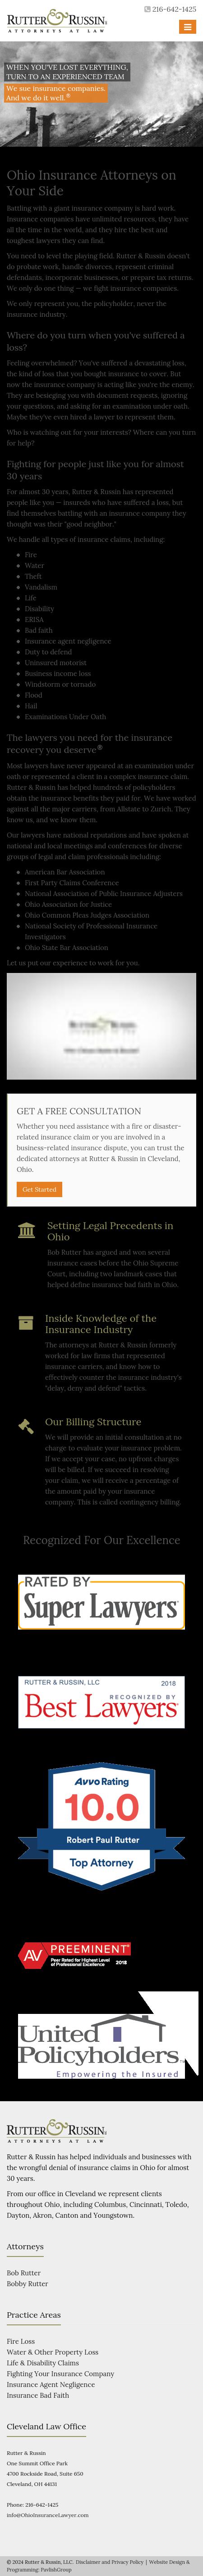 Rutter & Russin, LLC - Cleveland OH Lawyers